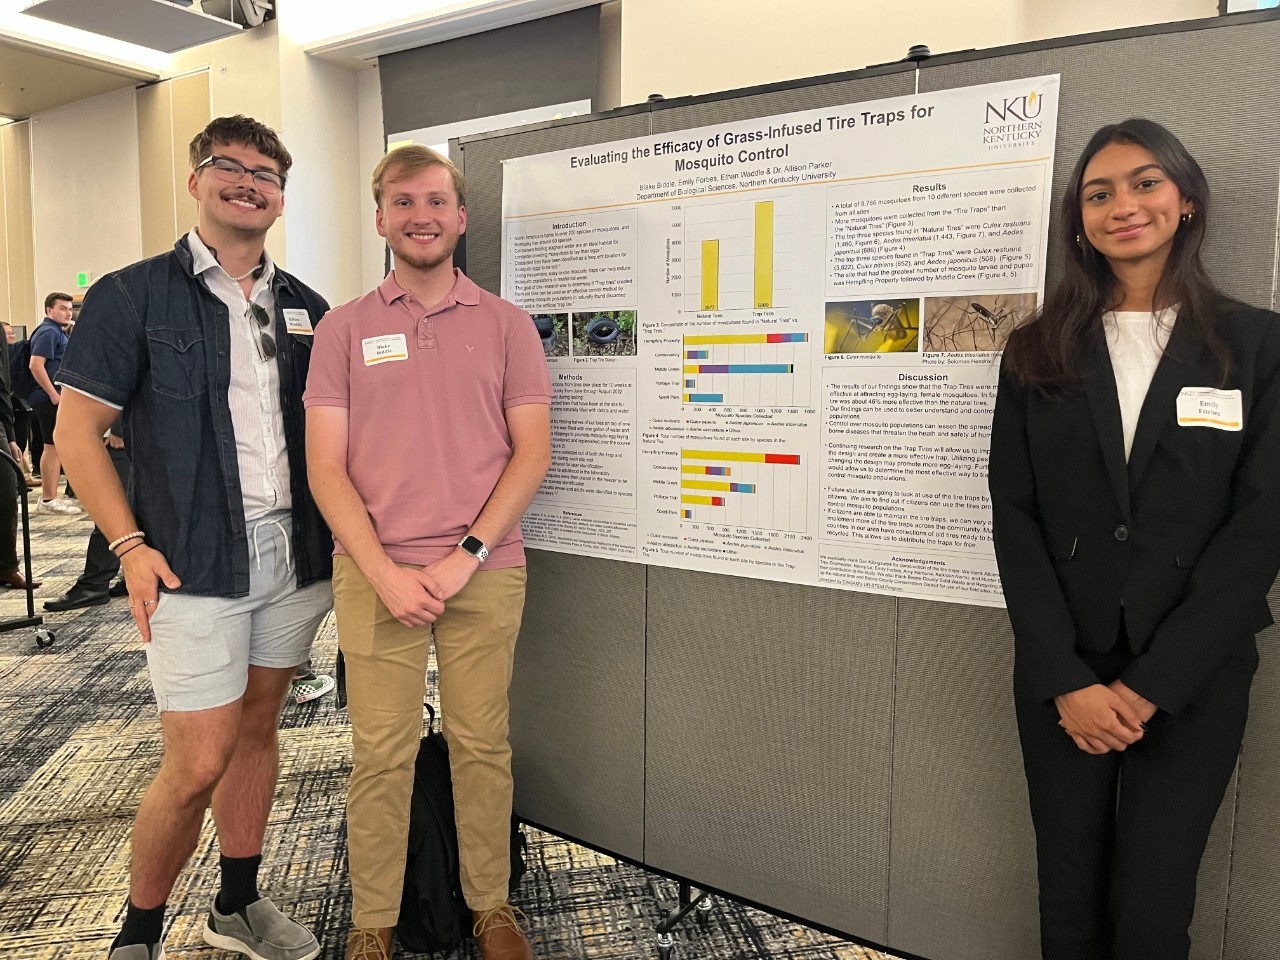 Three NKU students smiling in front of a poster presentation of their research